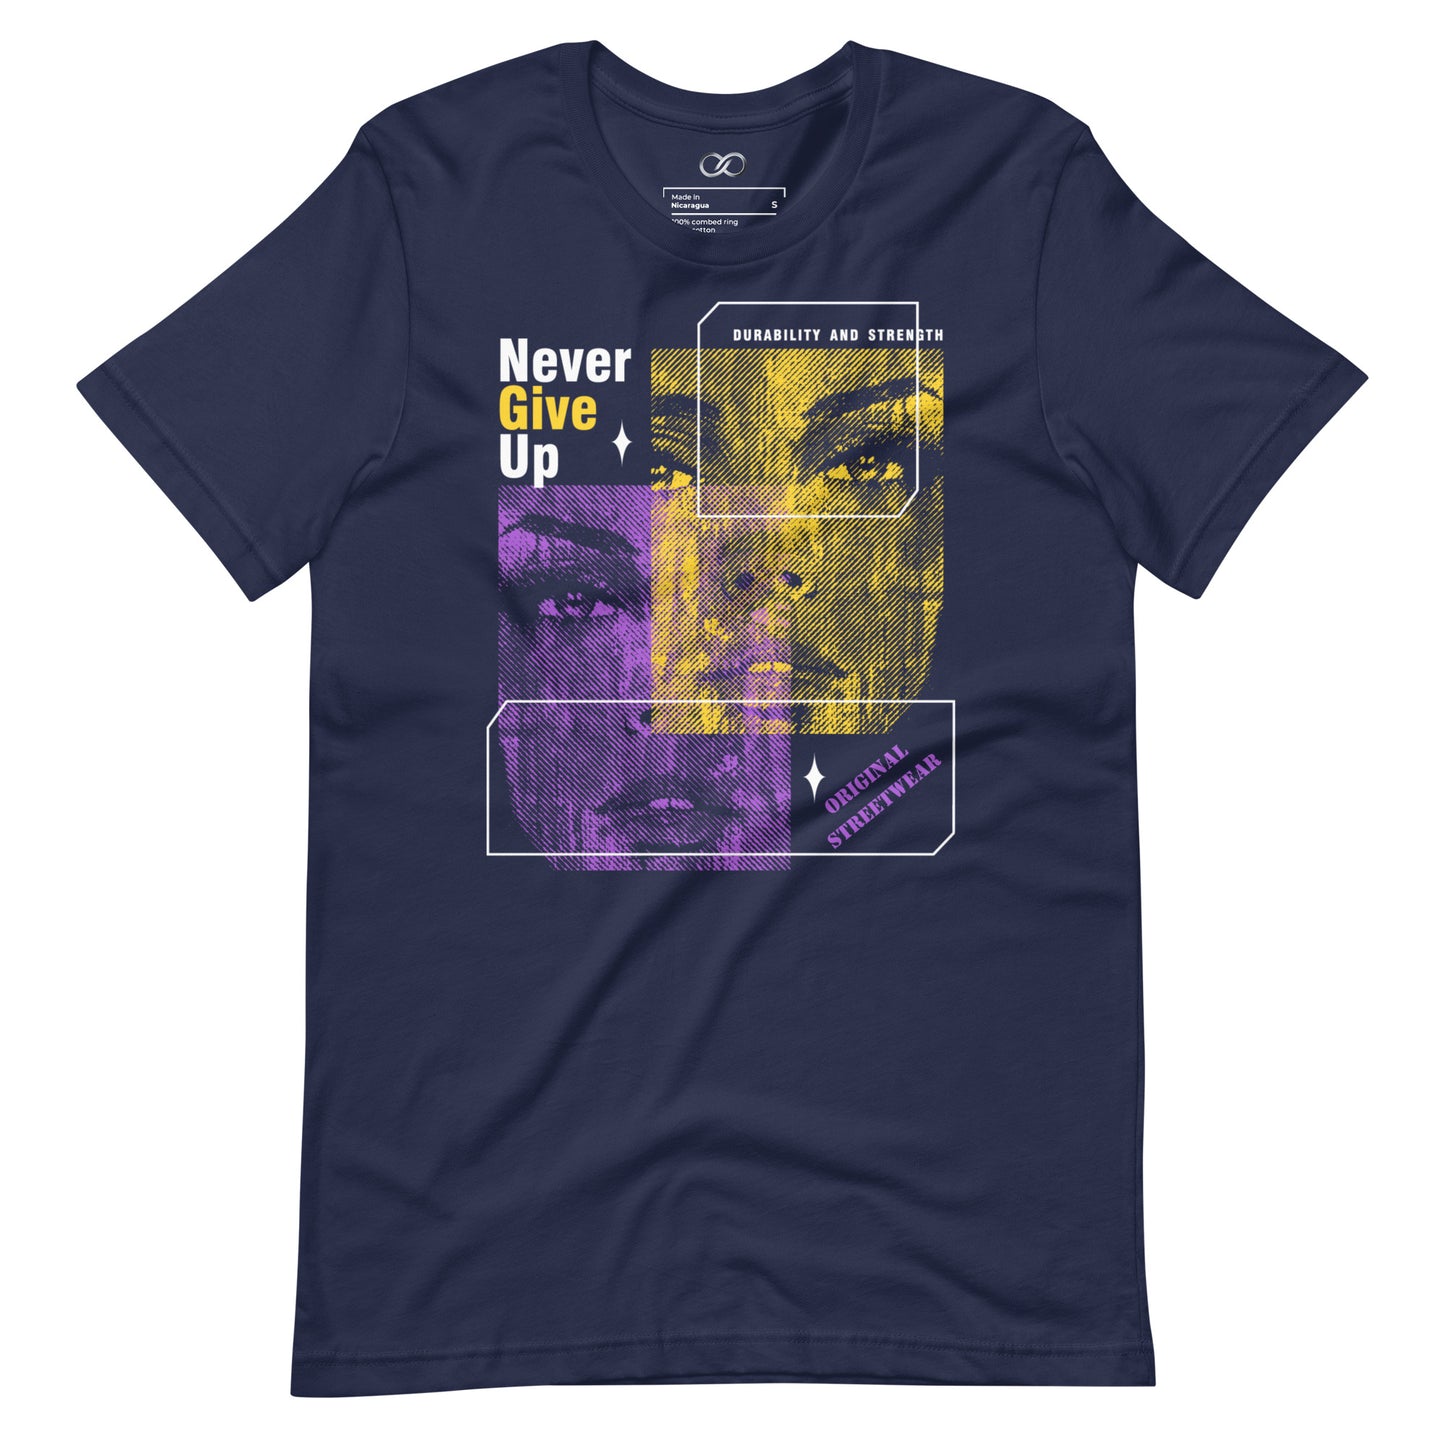 Never Give Up Urban T-Shirt - Motivational Graphic Tee